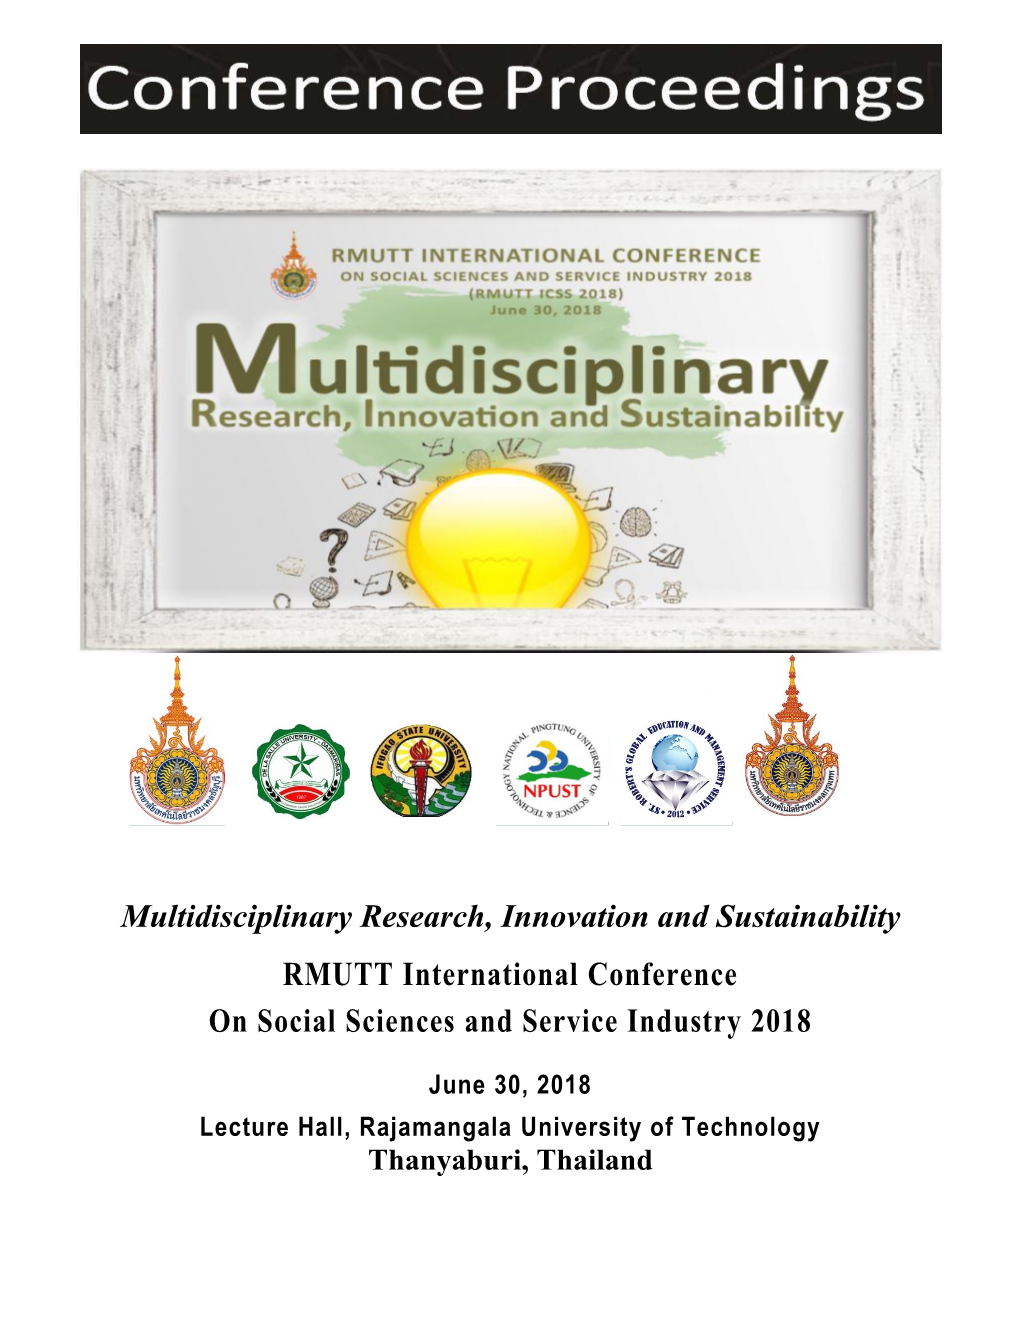 RMUTT International Conference on Social Sciences and Service Industry 2018